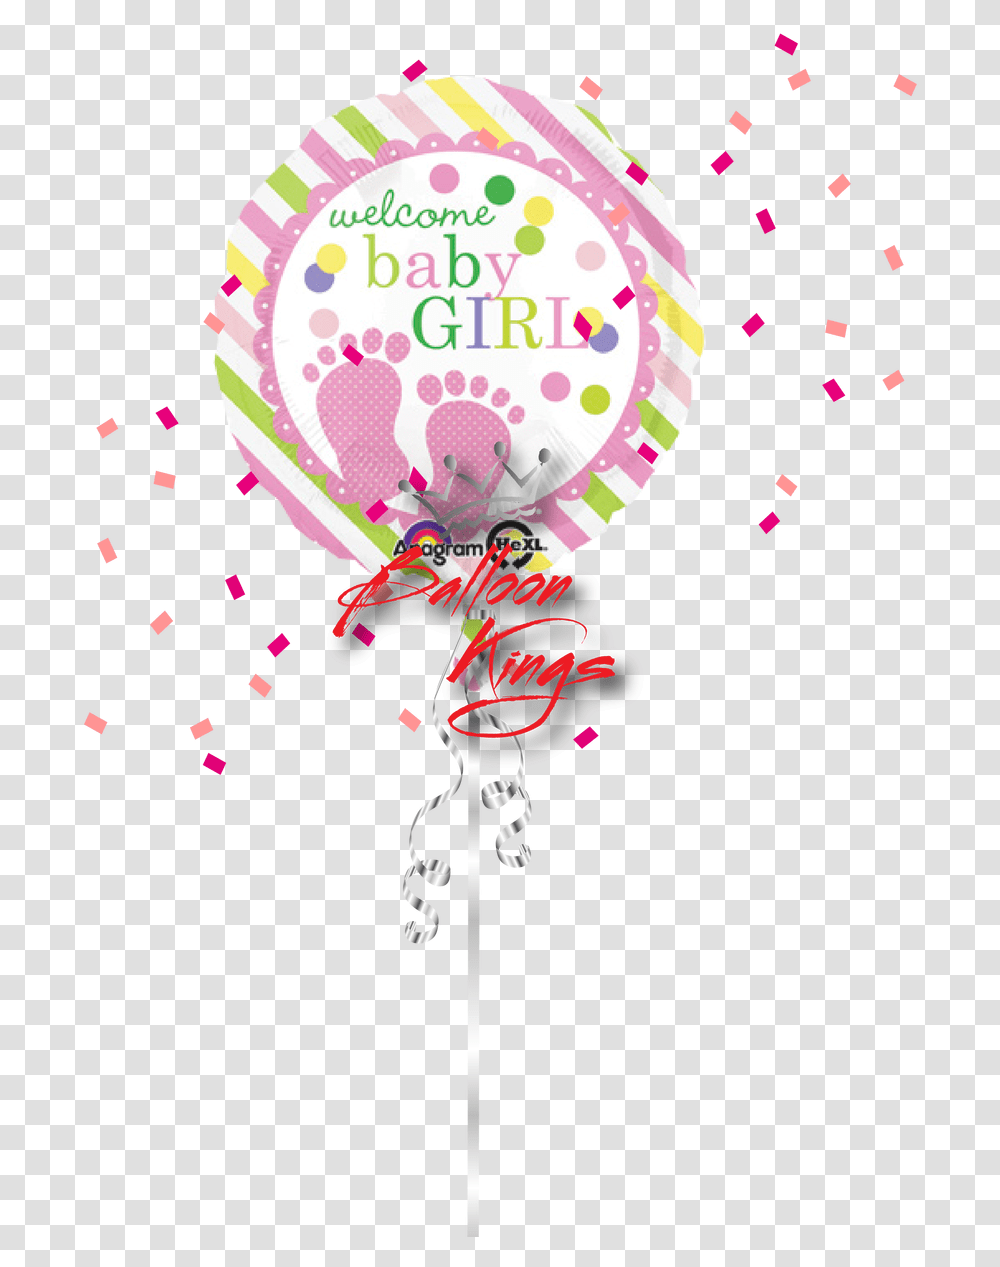 Welcome Baby Welcome Baby Girl, Balloon, Paper, Confetti Transparent Png